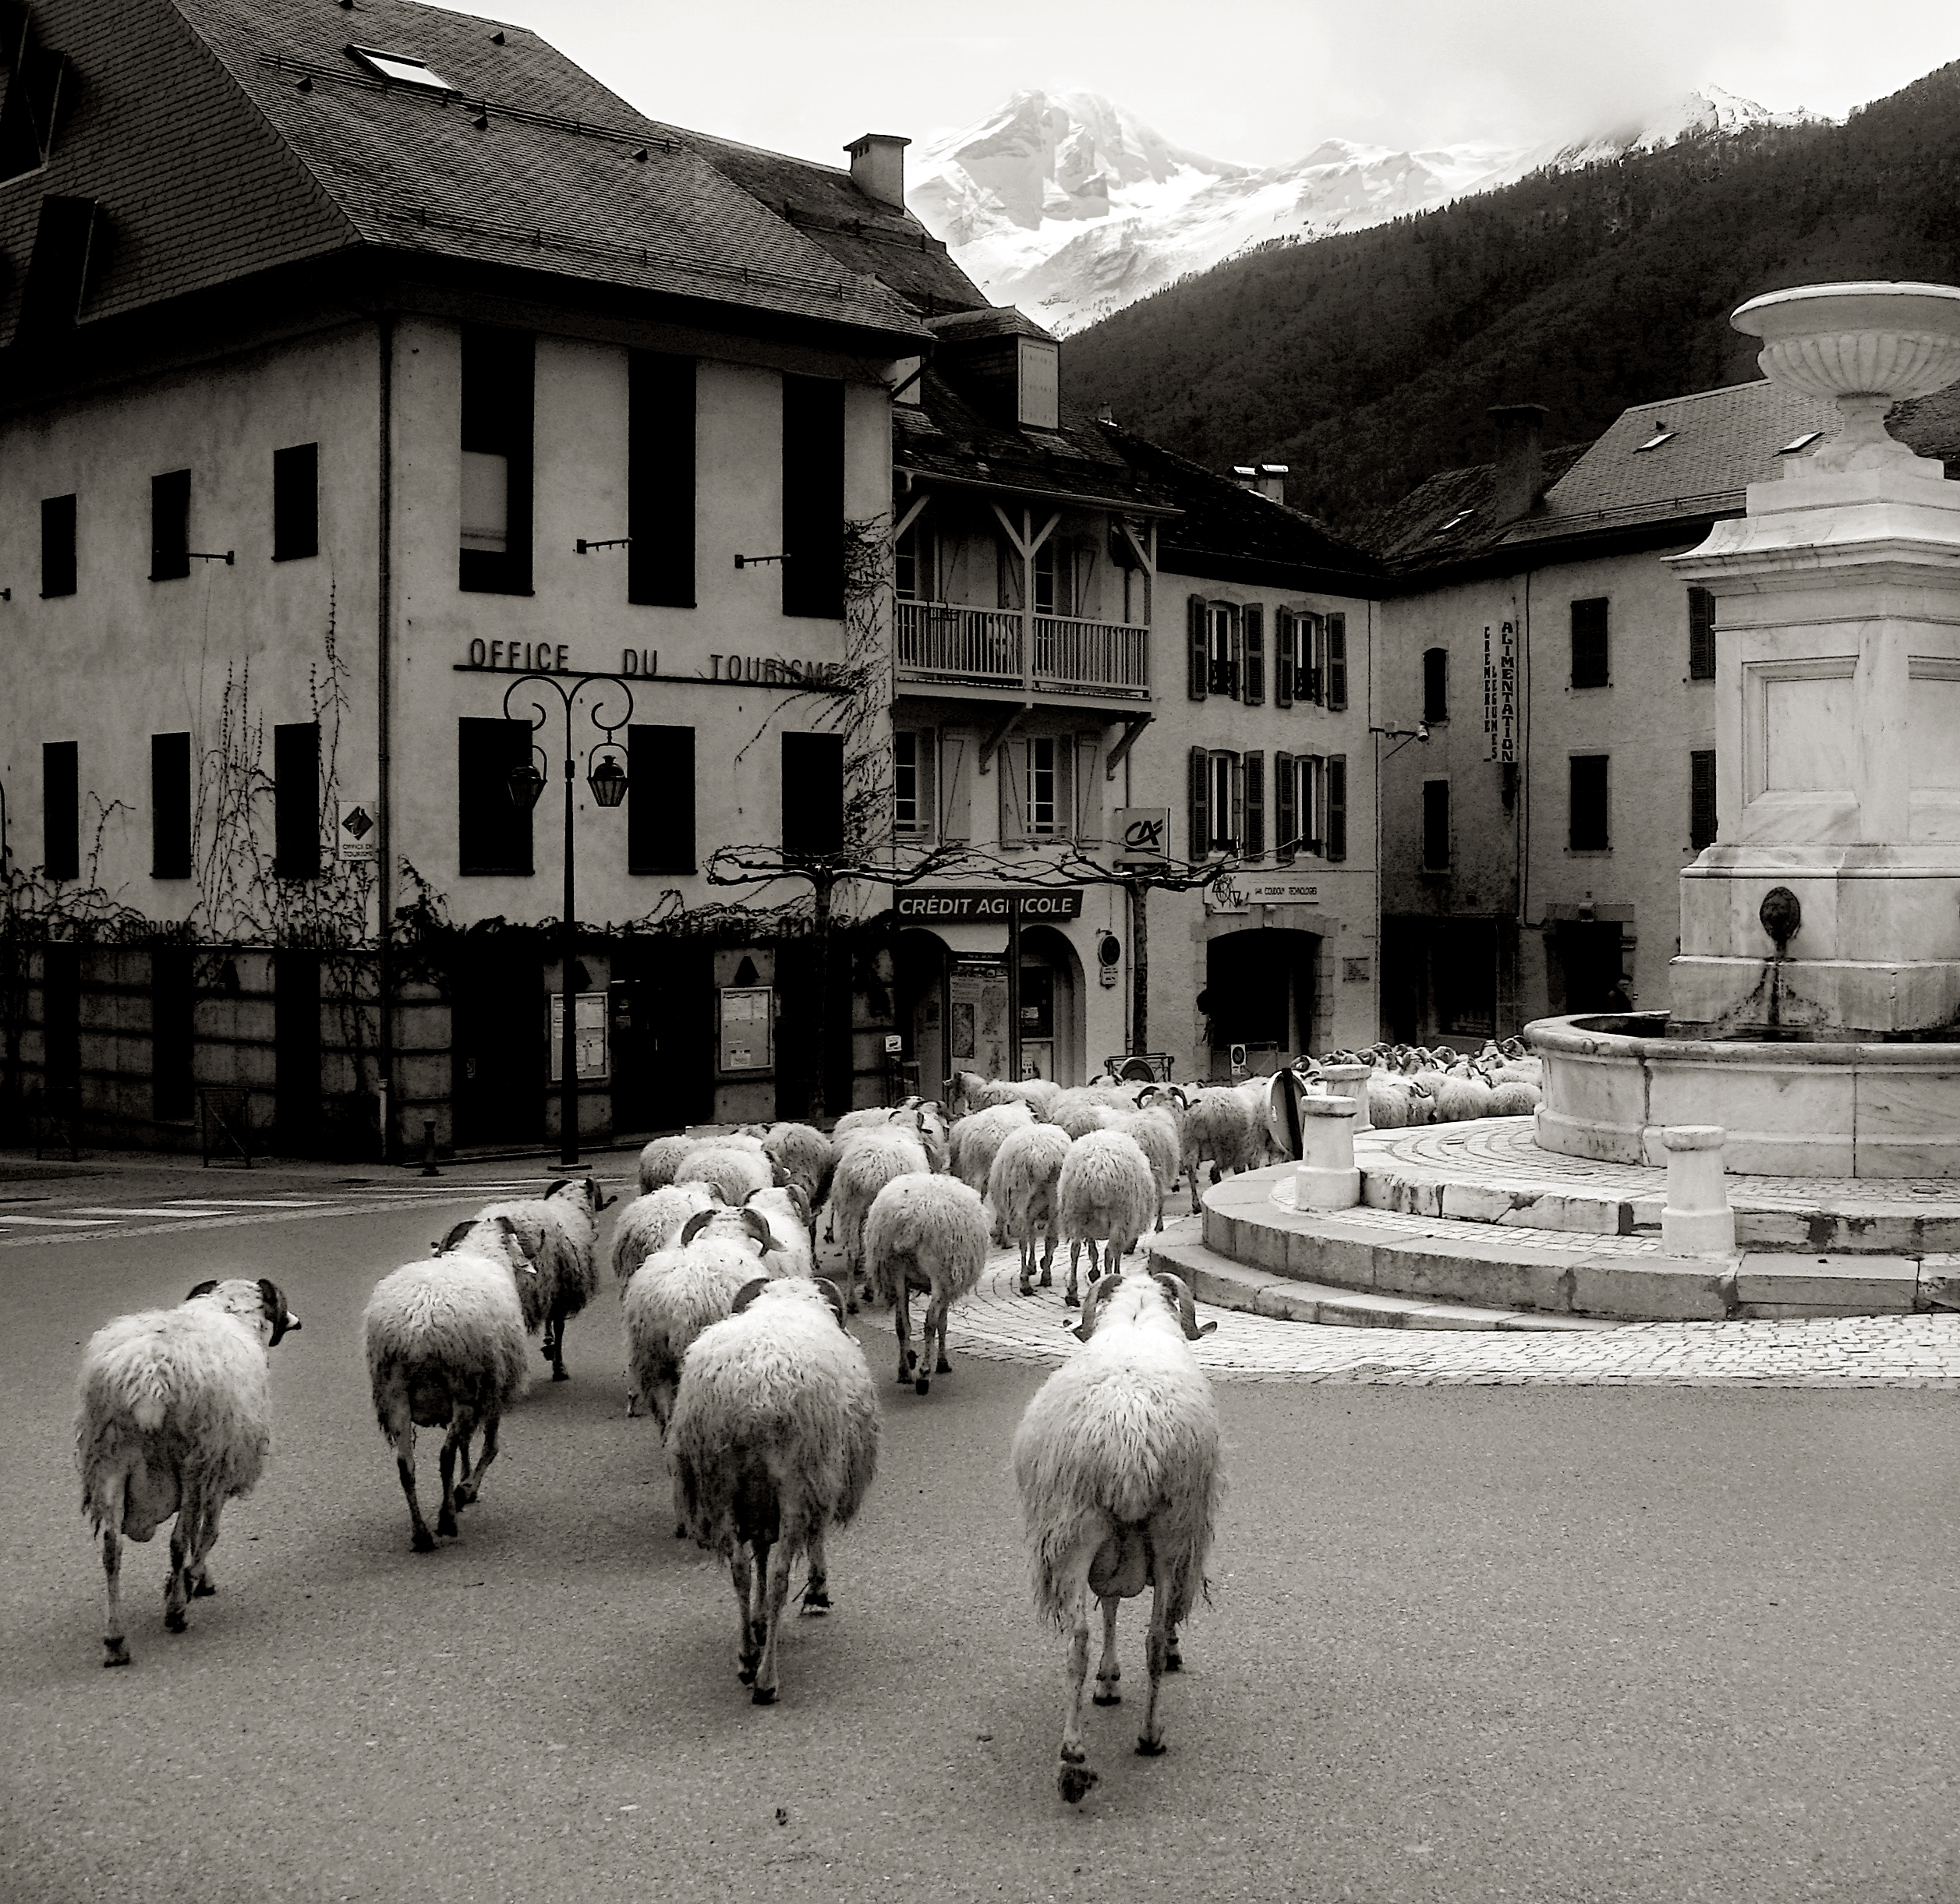 Sheep in old french village photo